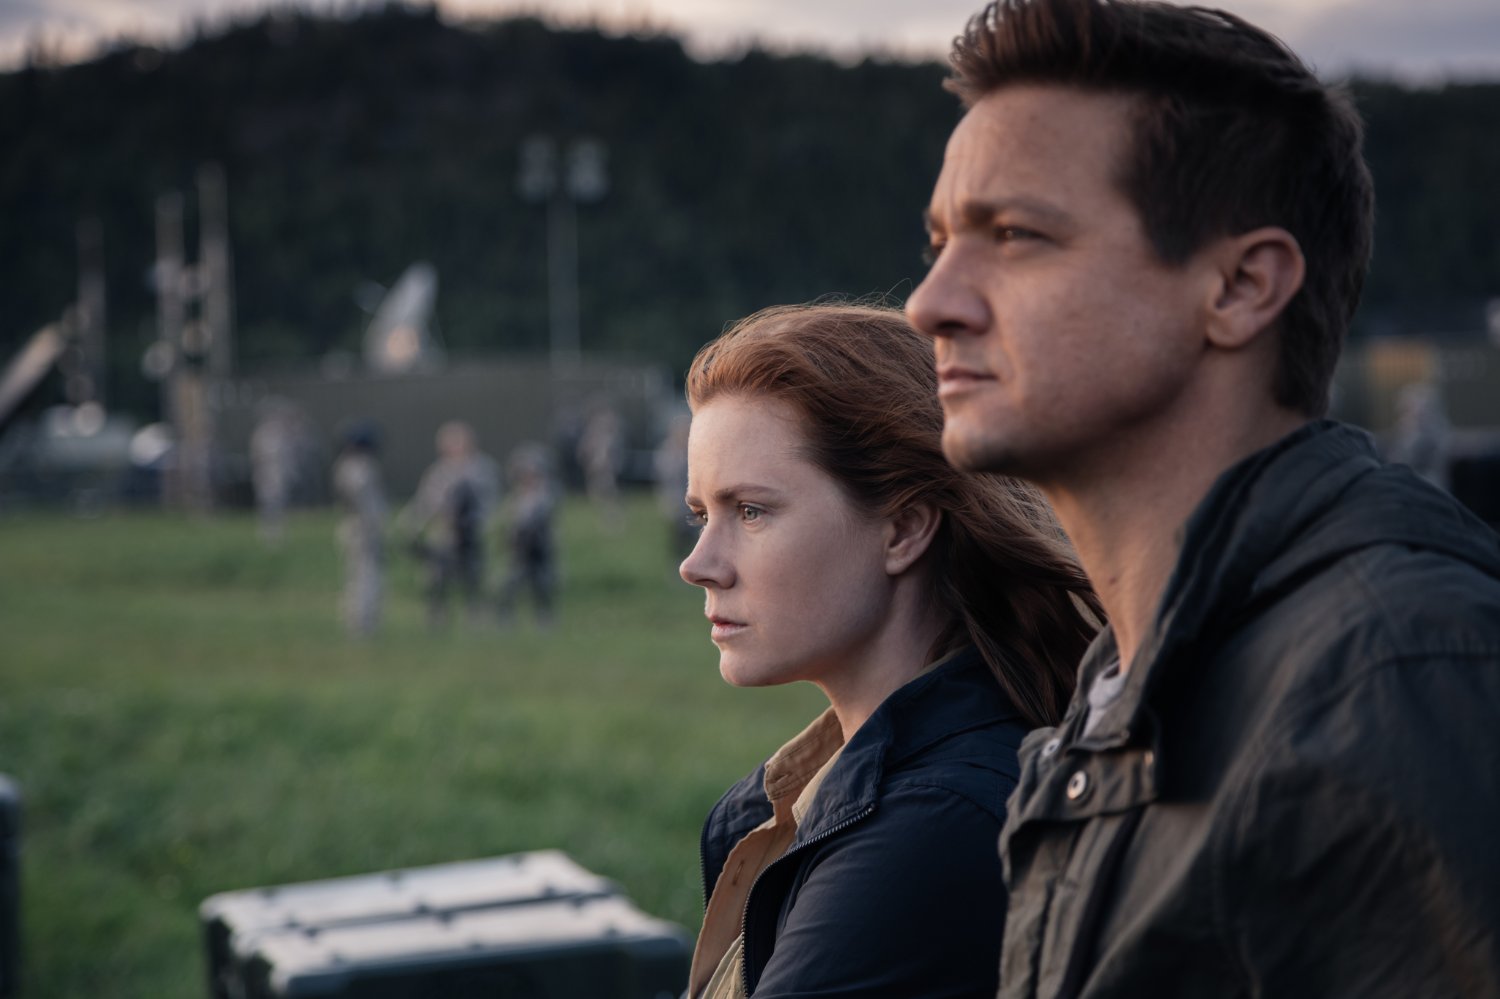 arrival-movie-review-3-1